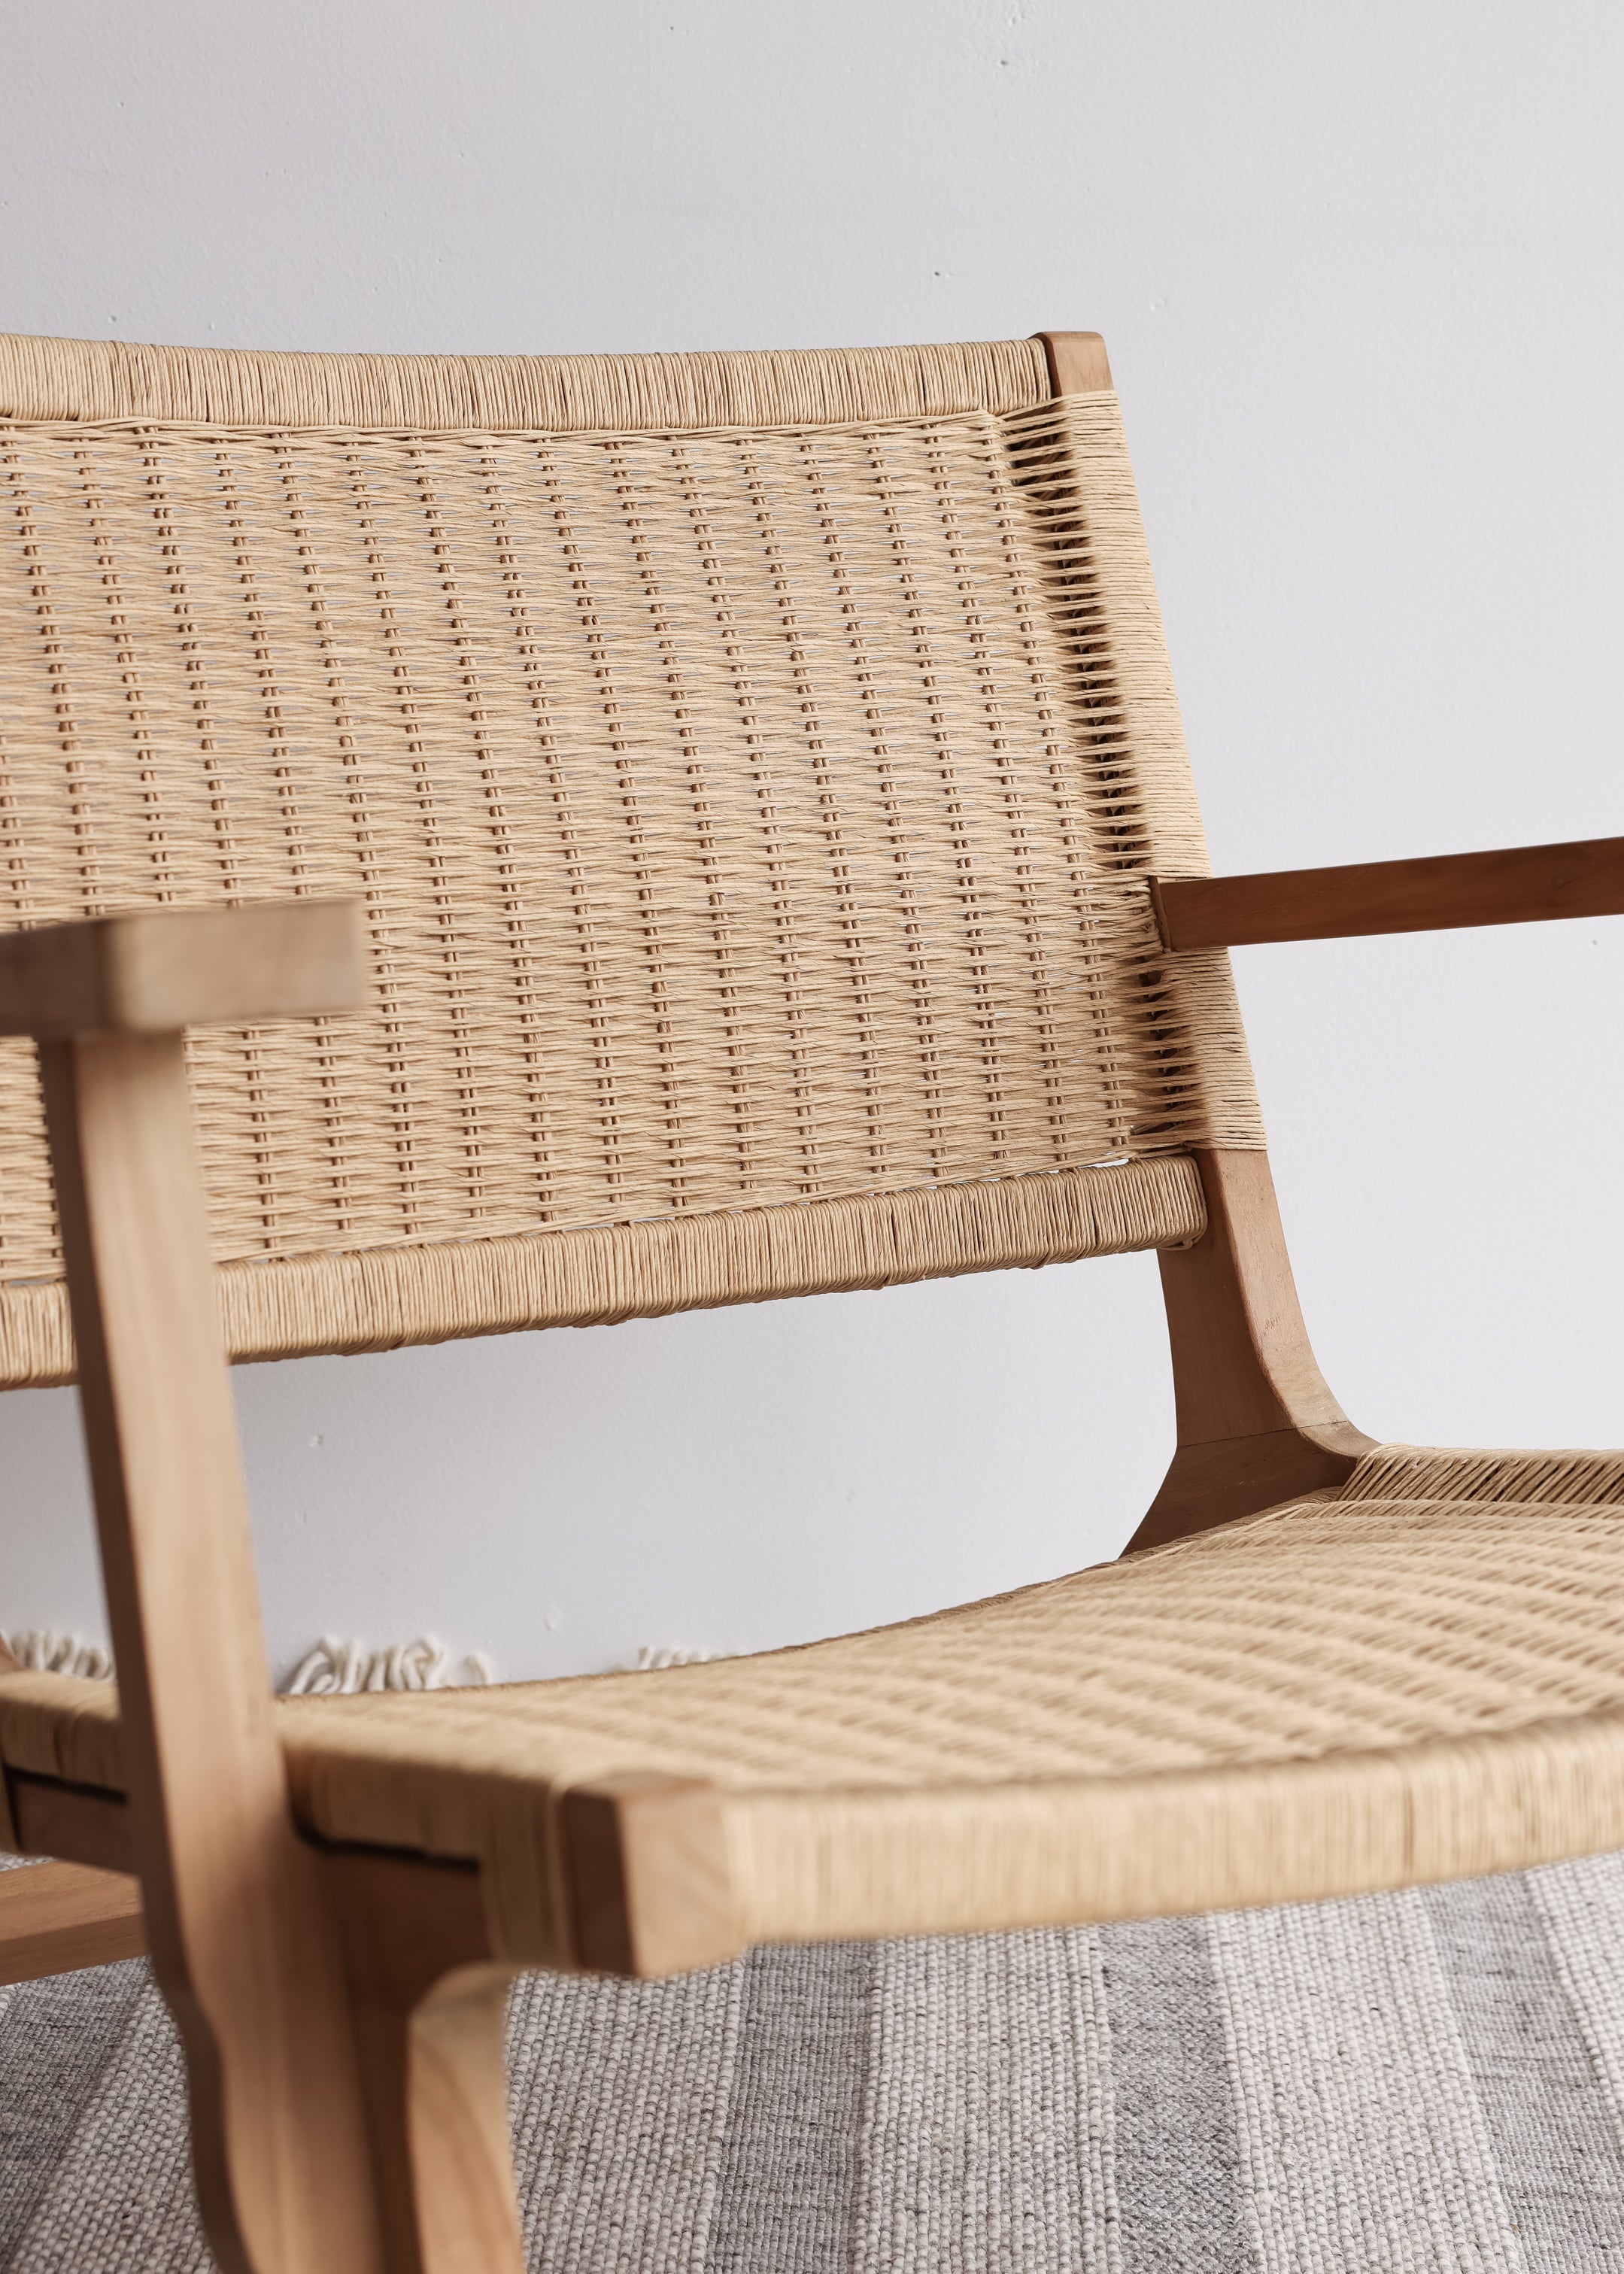 Sunday Teak Lounger with Arm Rest / Natural